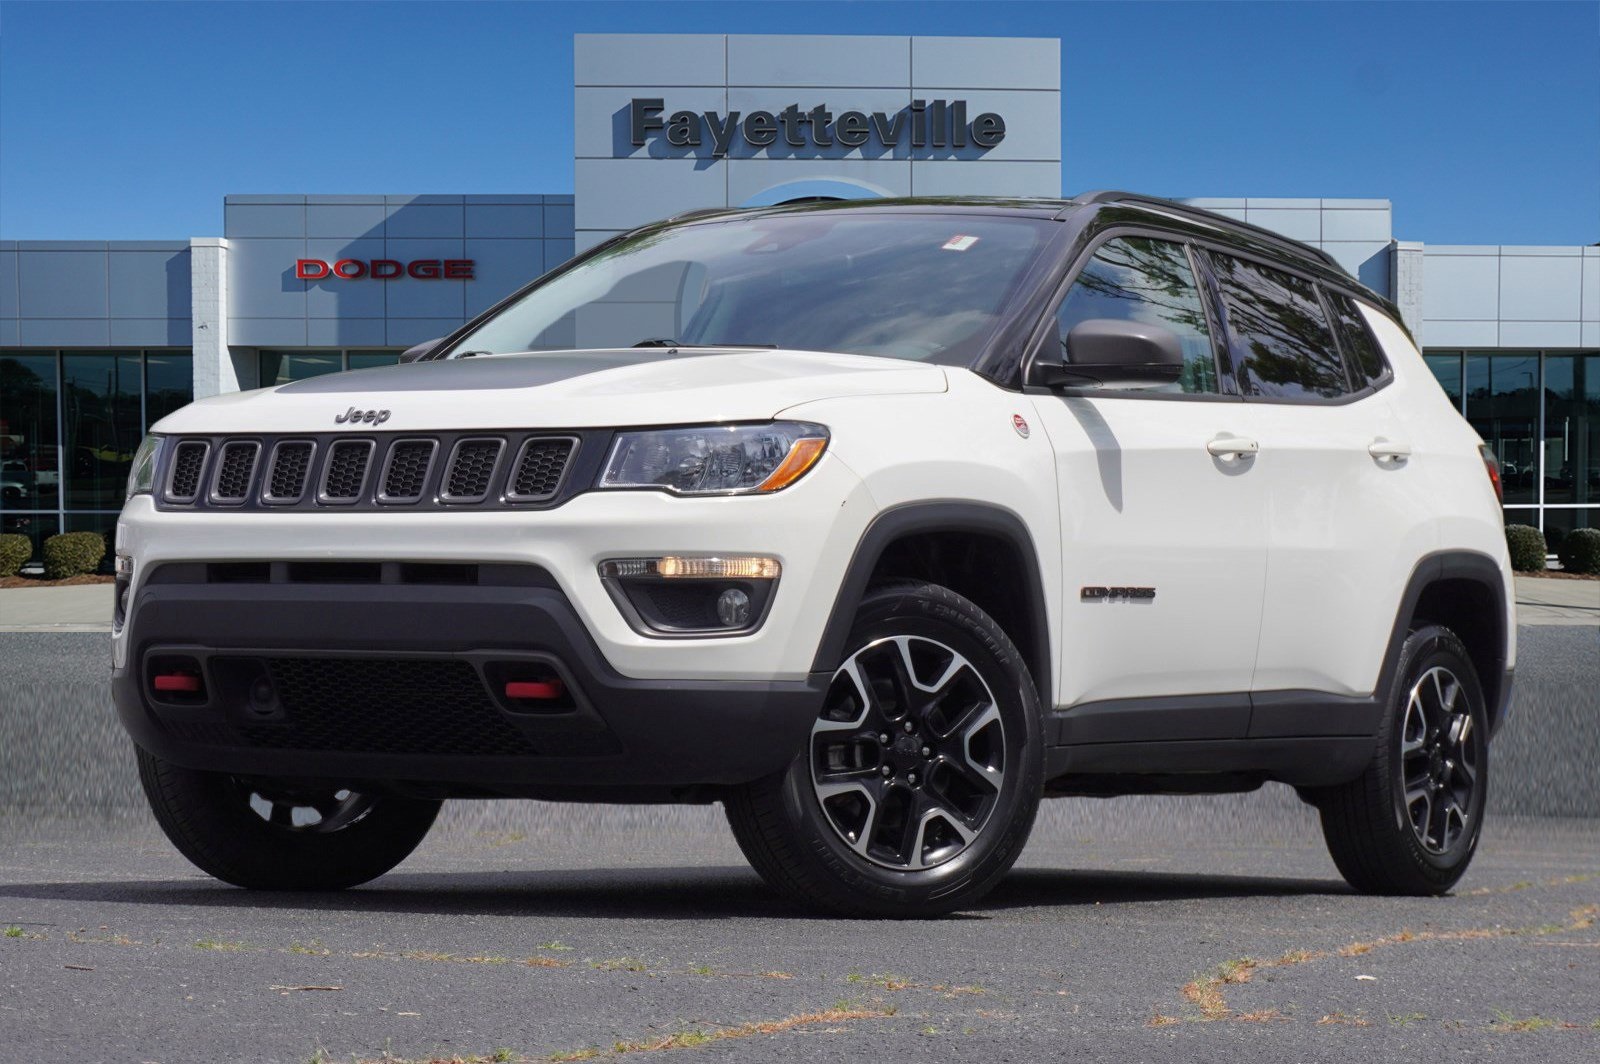 2021 Jeep Compass Fayetteville NC